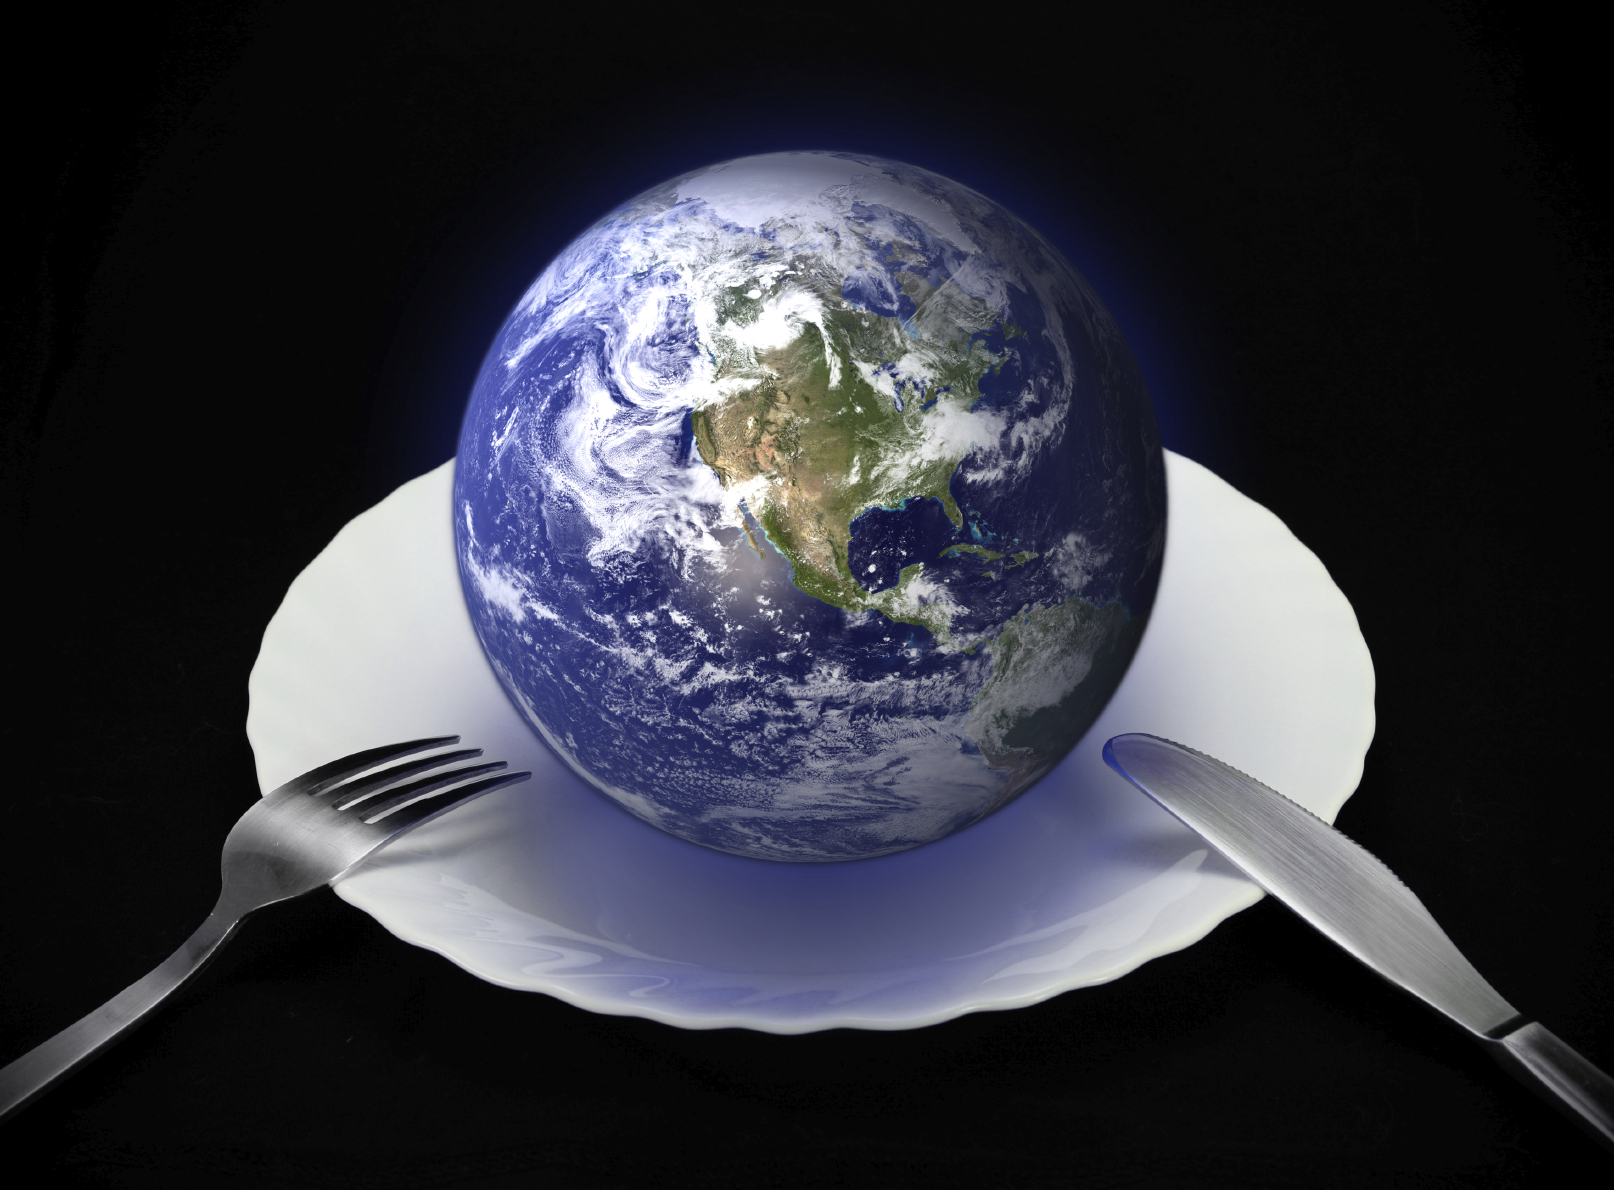 U.S. agencies consider a diet for a healthy planet